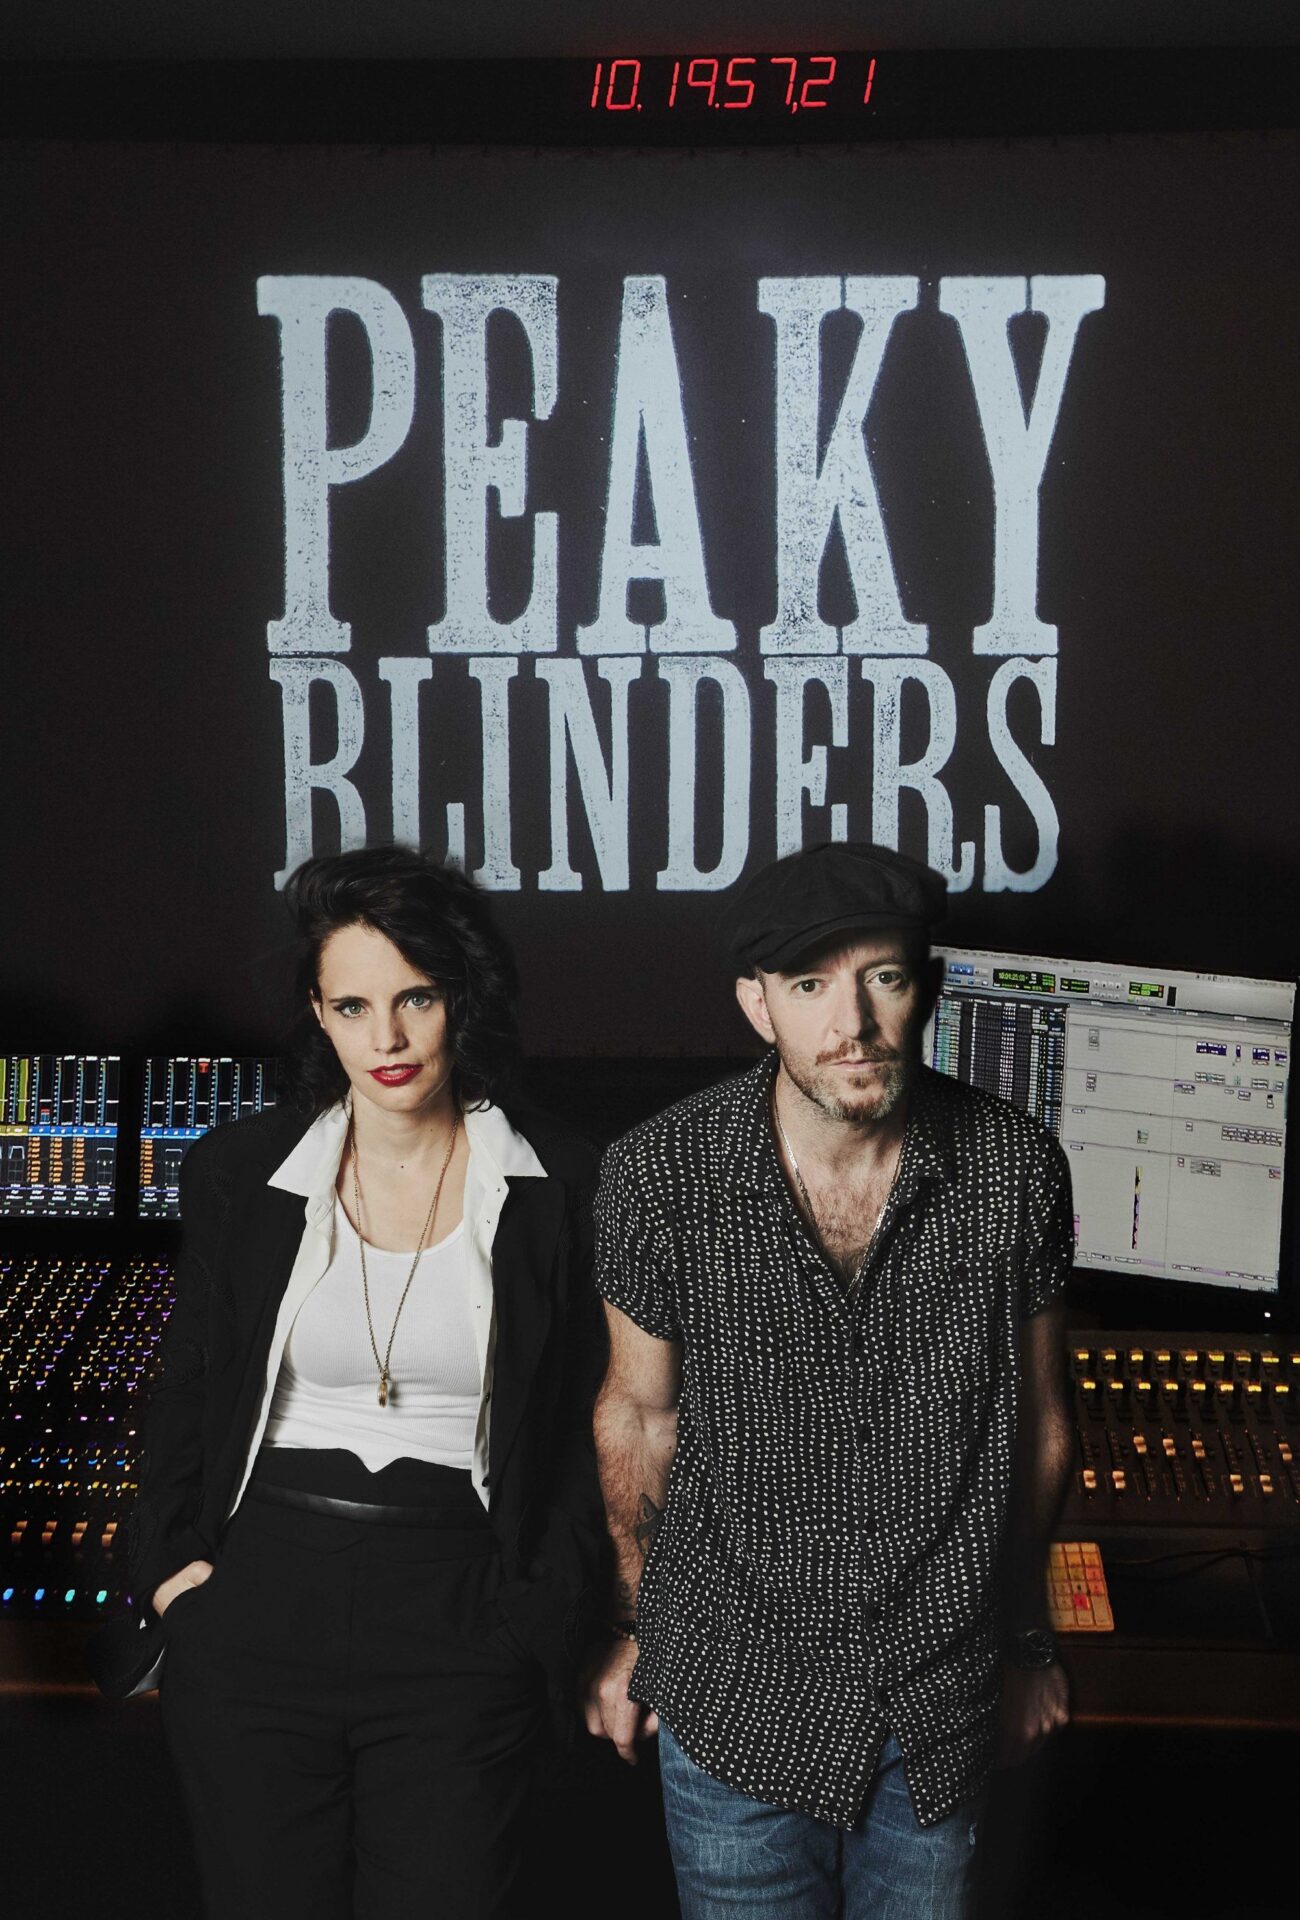 Anna Calvi writes score for next series of Peaky Blinders, what does it signify?